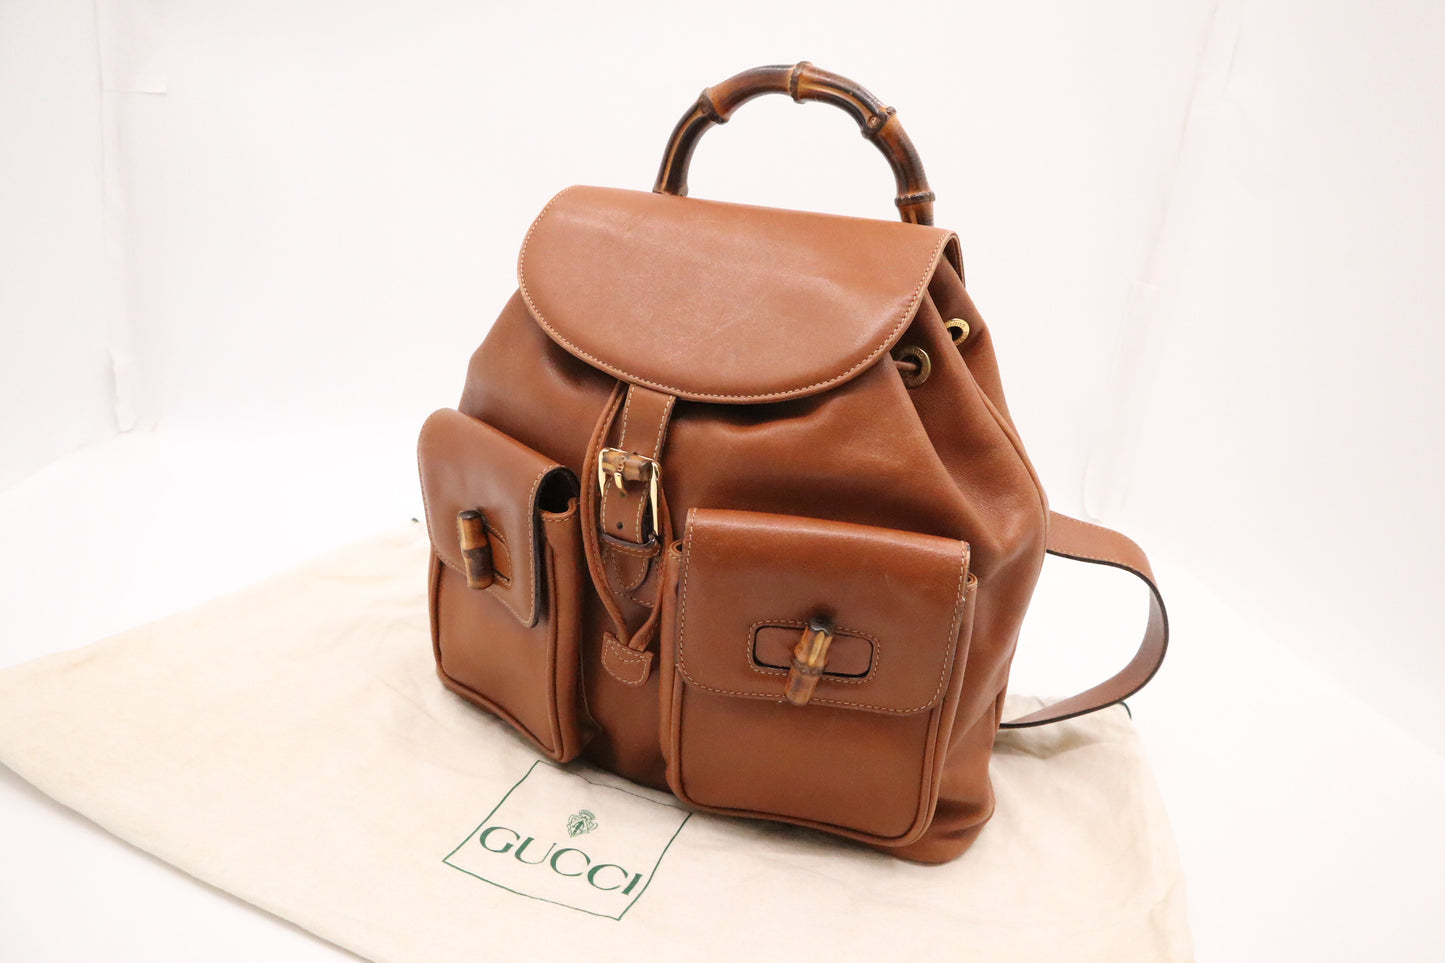 Gucci Backpack in Brown Leather